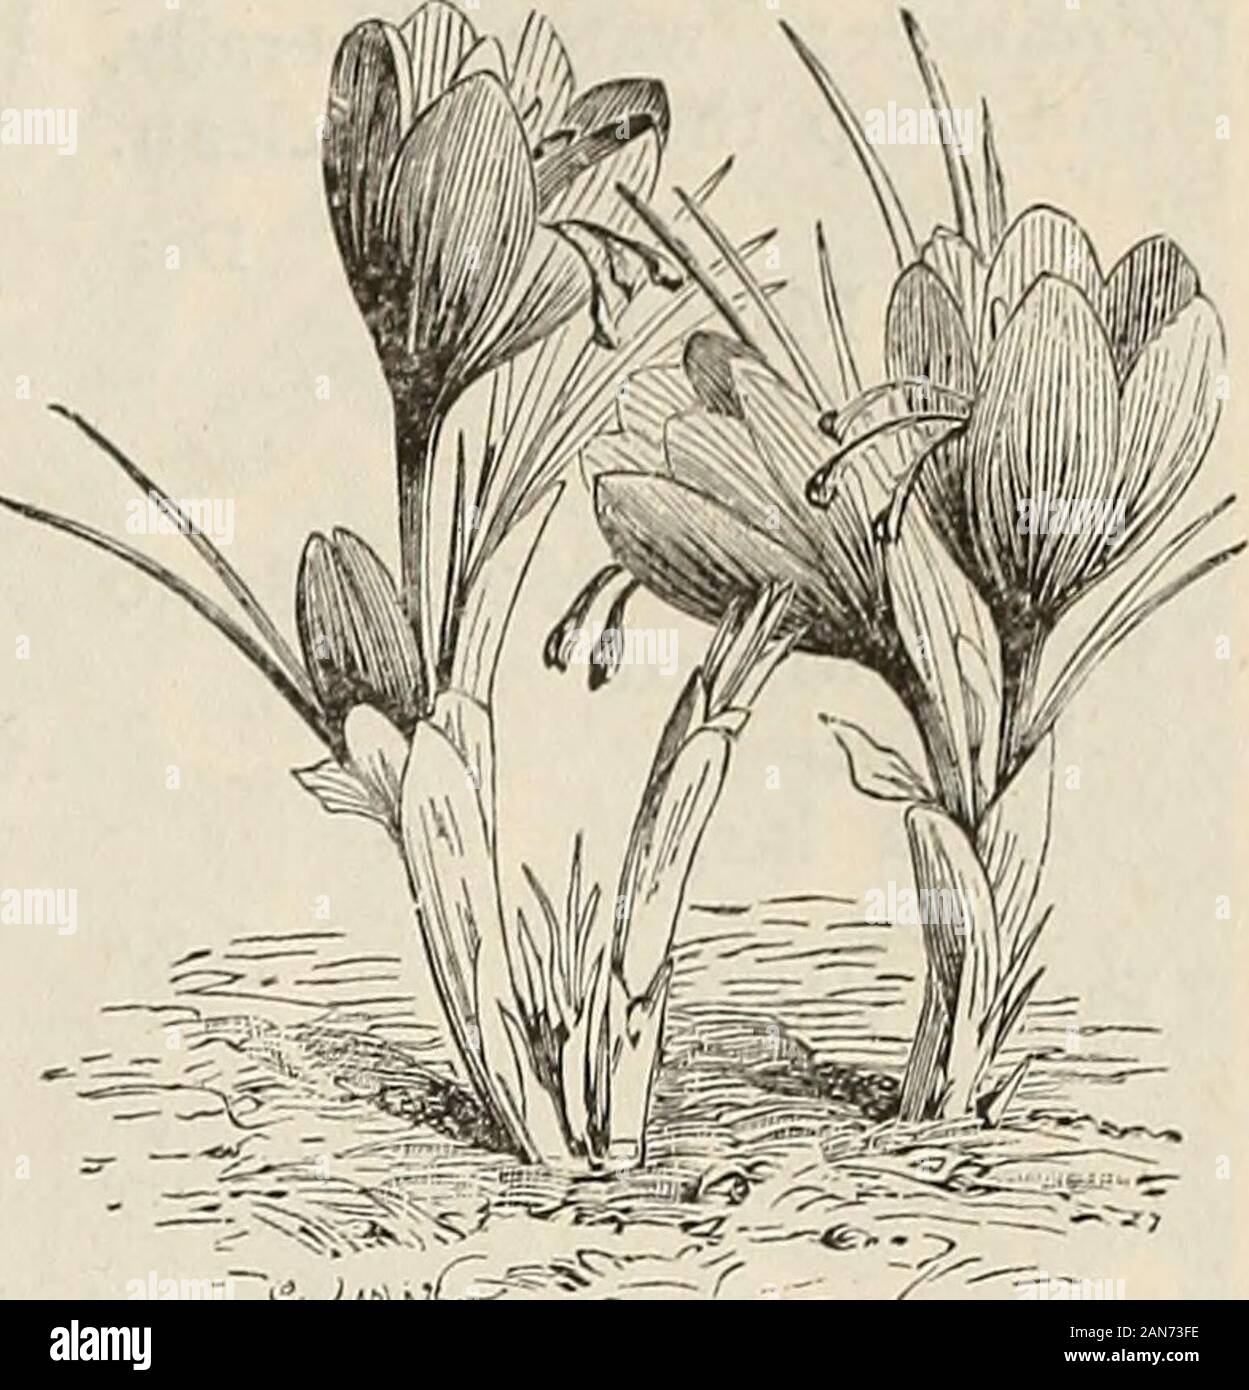 Autumn catalogue 1894 : bulbs . Each. Per Doz. $O.IO $I.OO .15 I.50 BULBS, PLANTS, SEEDS, AND SUNDRIES. 13 CRINUM. Handsome Amaryllis-like bulbous plants for the greenhouse or window. The flowers arecarried on stout stems, and continue beautiful for weeks. The bulbs are ready in November. Each. By Mail. Crinum, mixed, fine bulbs • $0.30 $0.40 Crinum Kirkii, flowers very large and remarkably beautiful; petals white with purple stripe -9° l-°° CROCUS, This favorite of the garden is one of the earliest tof.ower in spring, often displaying its bright and lovelyblossoms early in March. Plant the bu Stock Photo